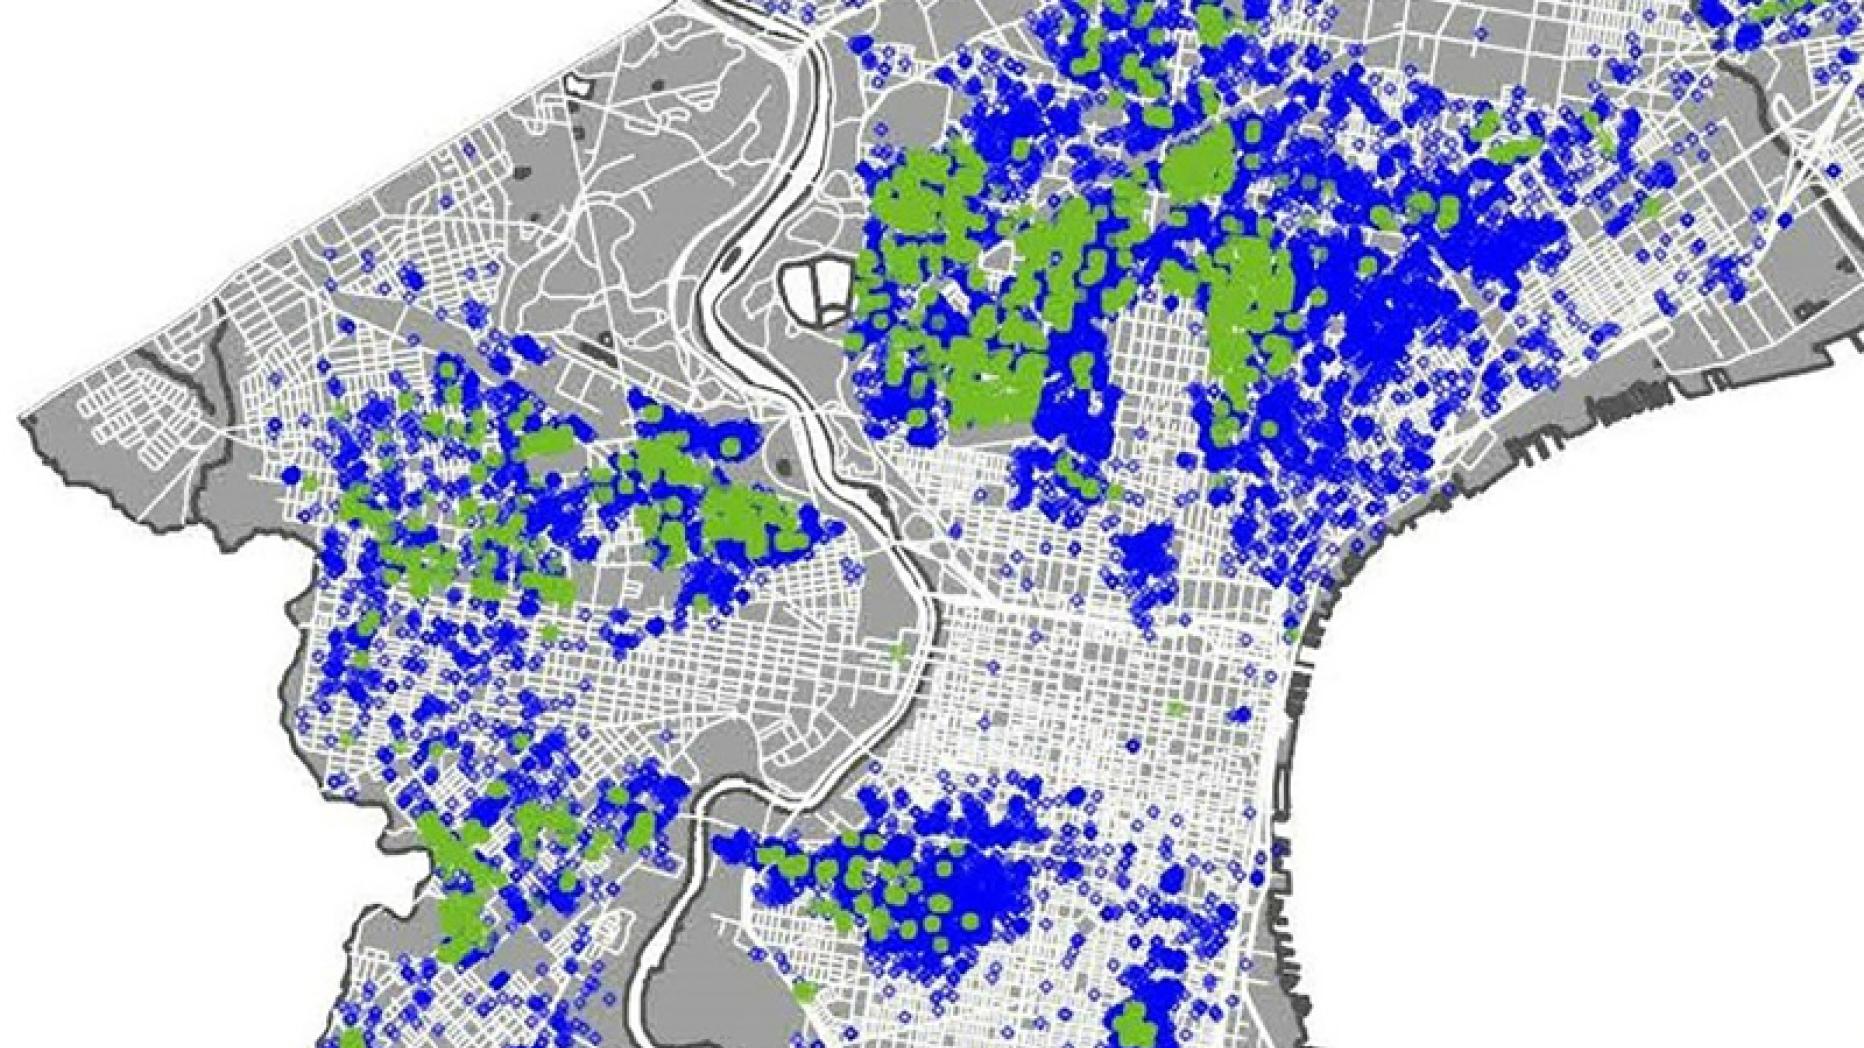 A map of Philadelphia with green and blue boxes